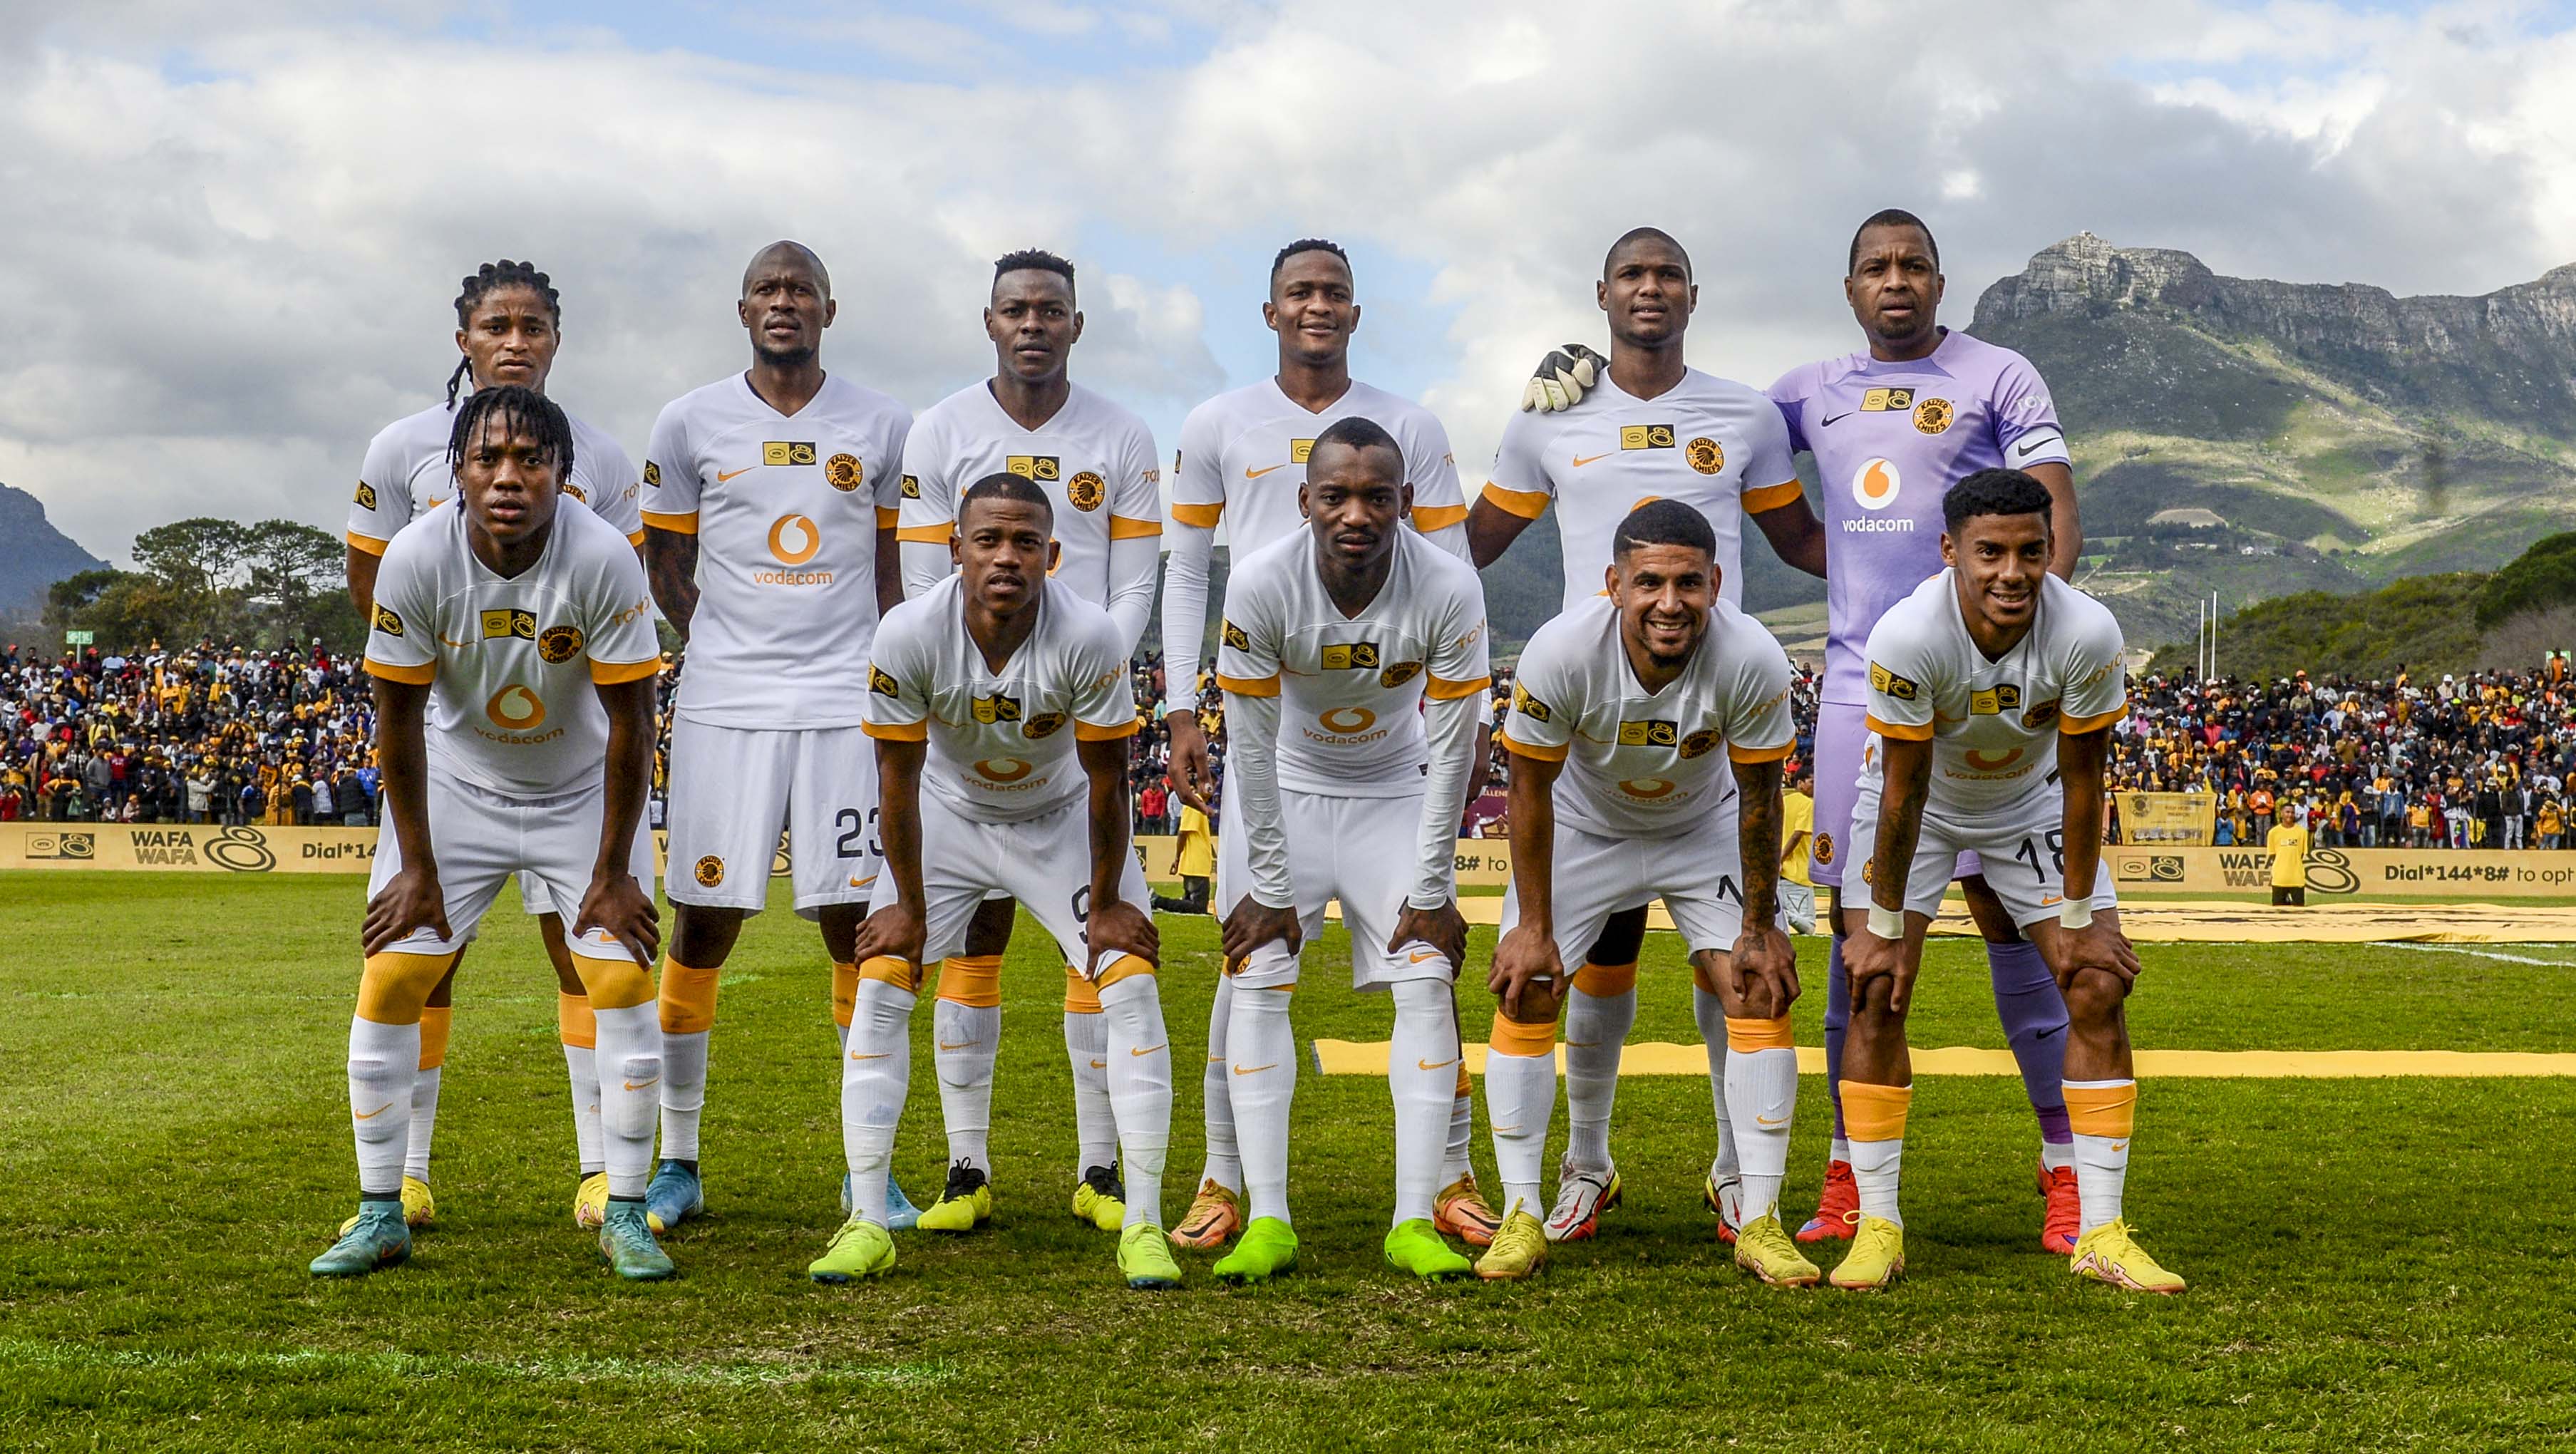 Kaizer Chiefs advanced to the semi-finals of the lucrative competition after overcoming Stellenbosch FC at a sold-out Danie Craven Stadium on Sunday afternoon